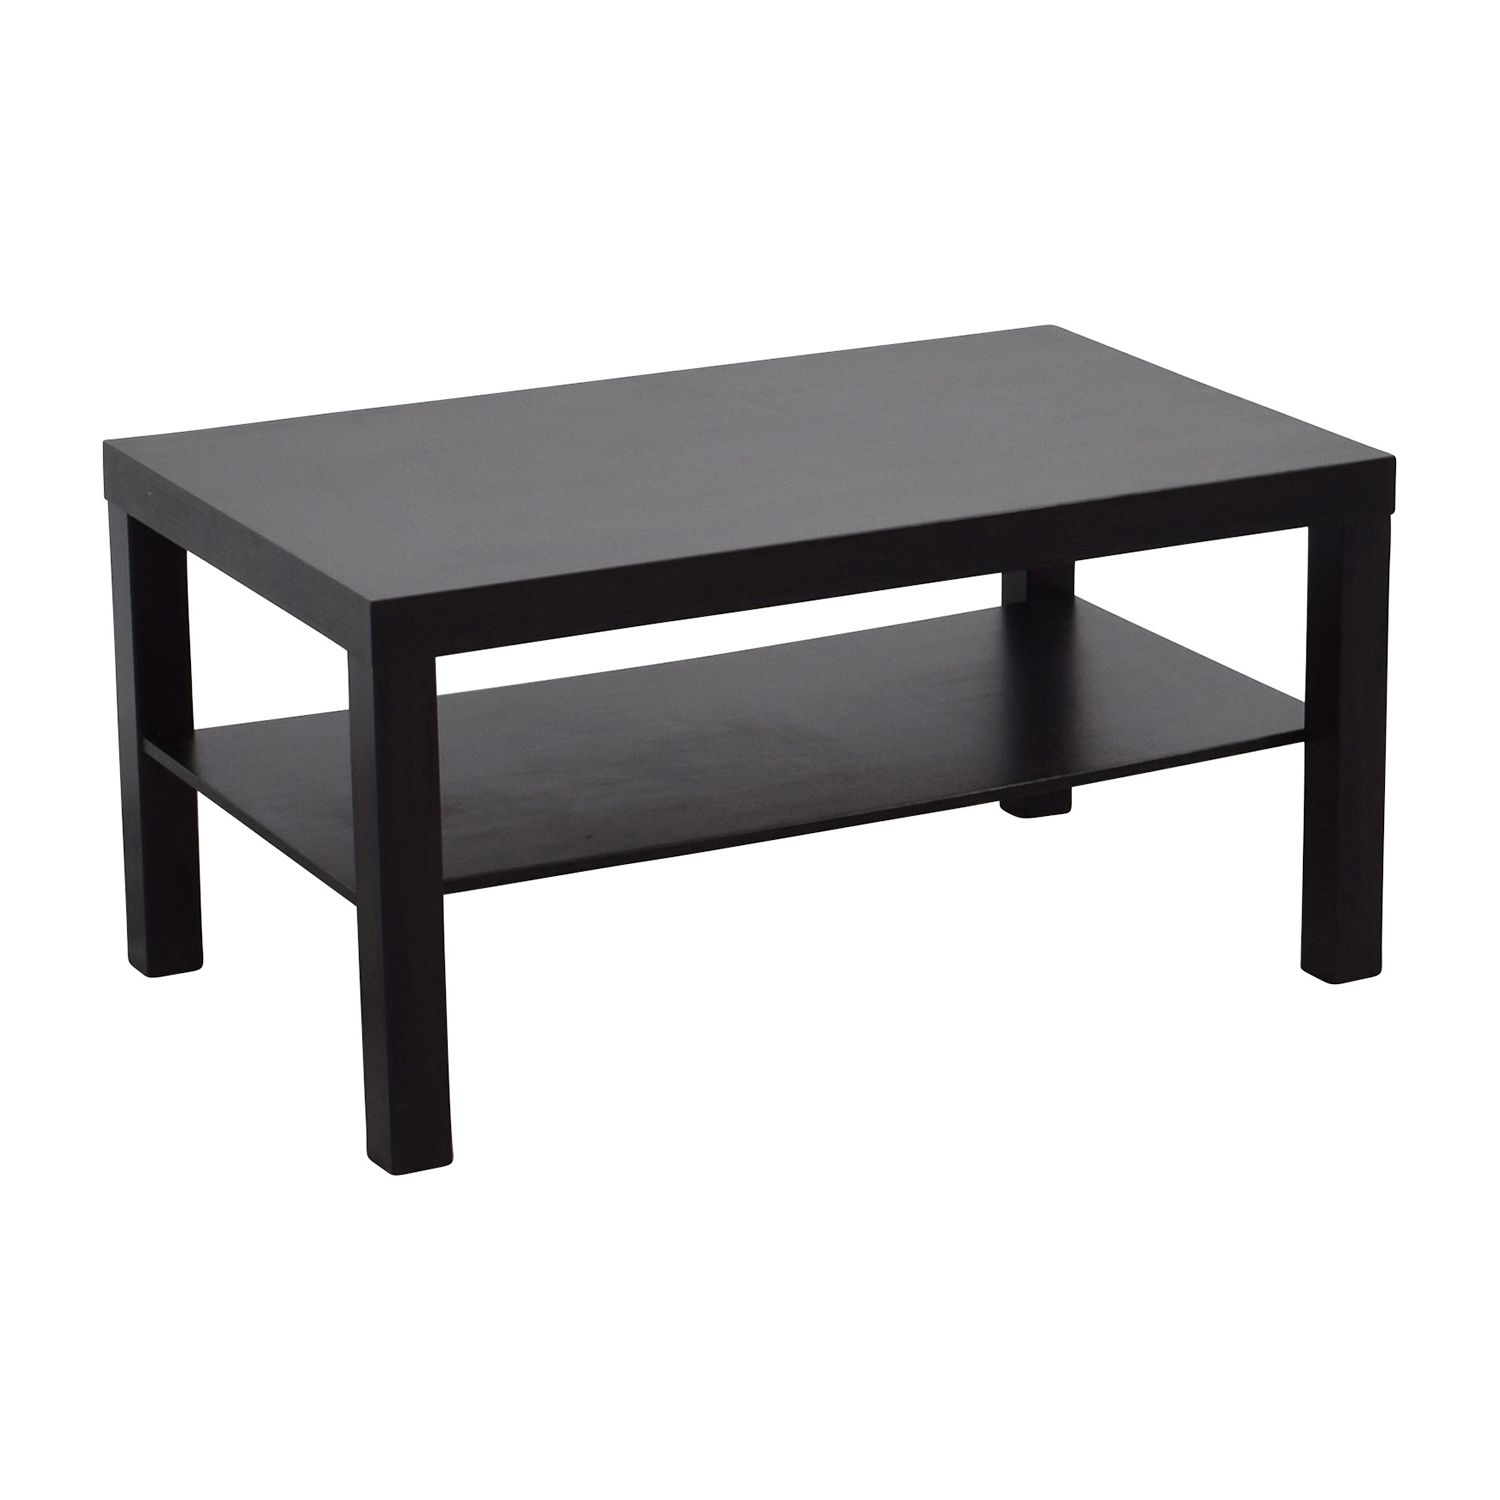 [%71% Off – Ikea Ikea Dark Brown Rectangular Coffee Table / Tables Within Most Up To Date Dark Brown Coffee Tables|dark Brown Coffee Tables Within Most Up To Date 71% Off – Ikea Ikea Dark Brown Rectangular Coffee Table / Tables|well Liked Dark Brown Coffee Tables Inside 71% Off – Ikea Ikea Dark Brown Rectangular Coffee Table / Tables|famous 71% Off – Ikea Ikea Dark Brown Rectangular Coffee Table / Tables With Regard To Dark Brown Coffee Tables%] (View 3 of 10)